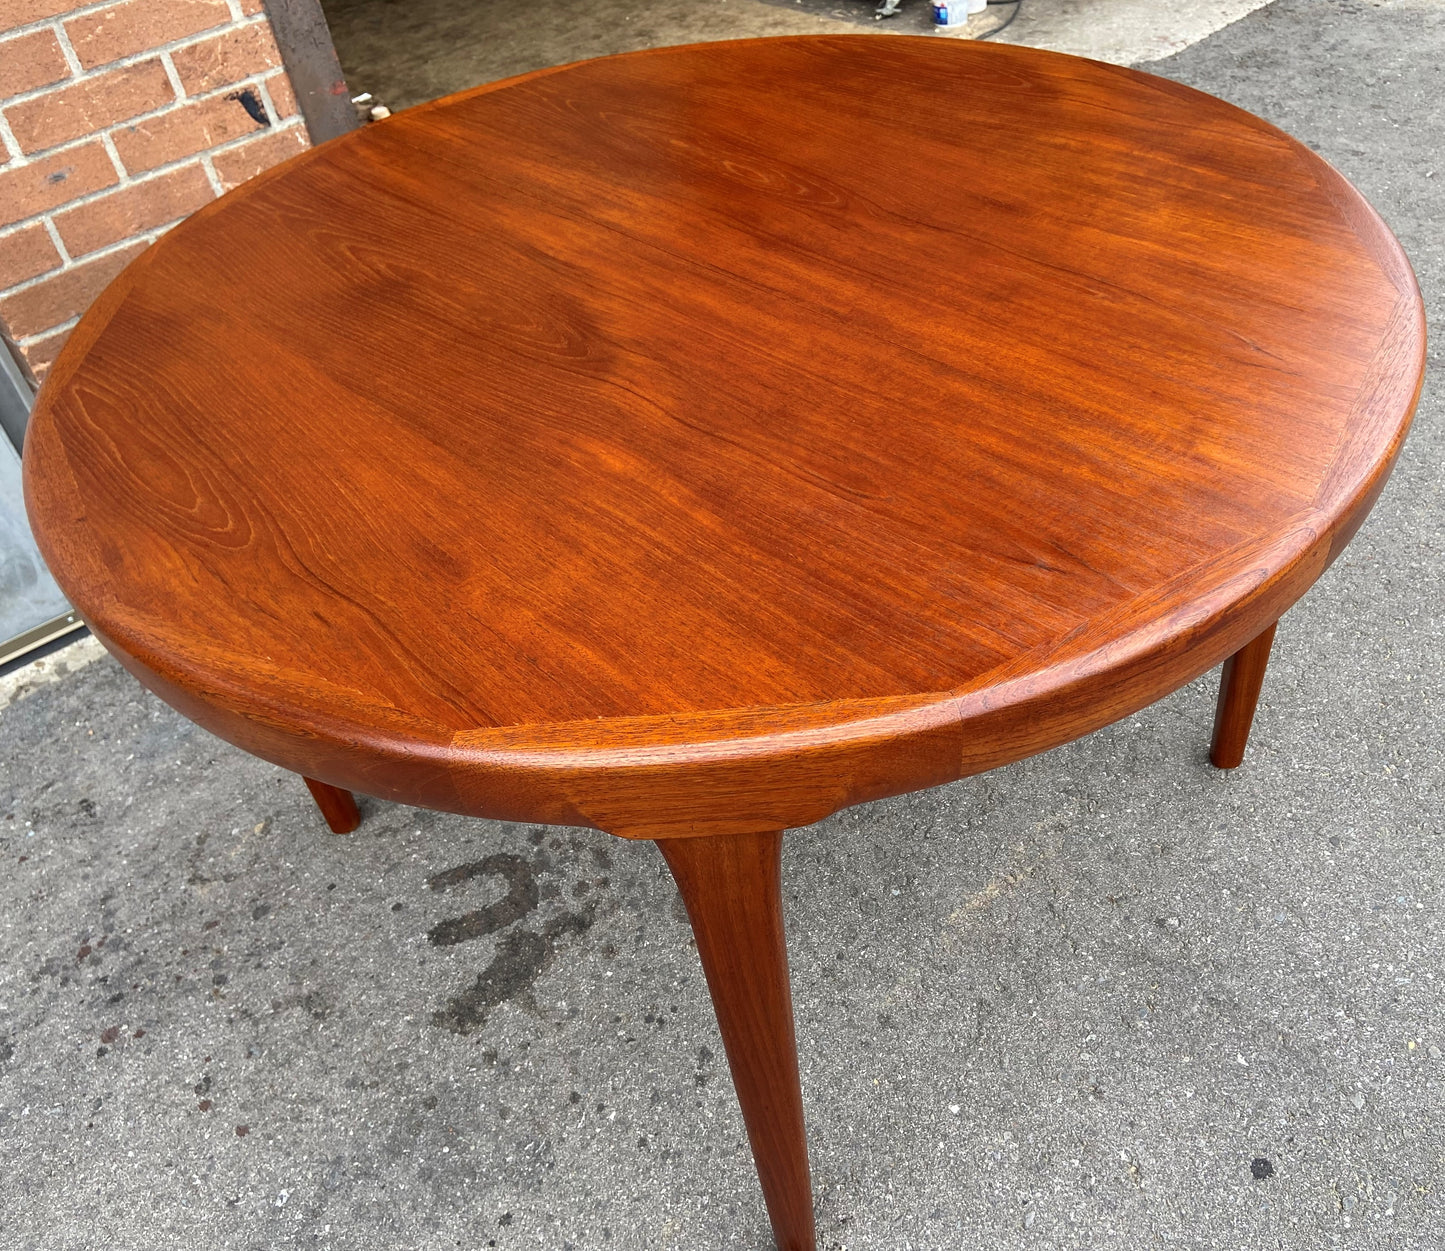 REFINISHED Danish Mid Century Modern Teak Table Round to Oval w 2 Leaves 47"-89"